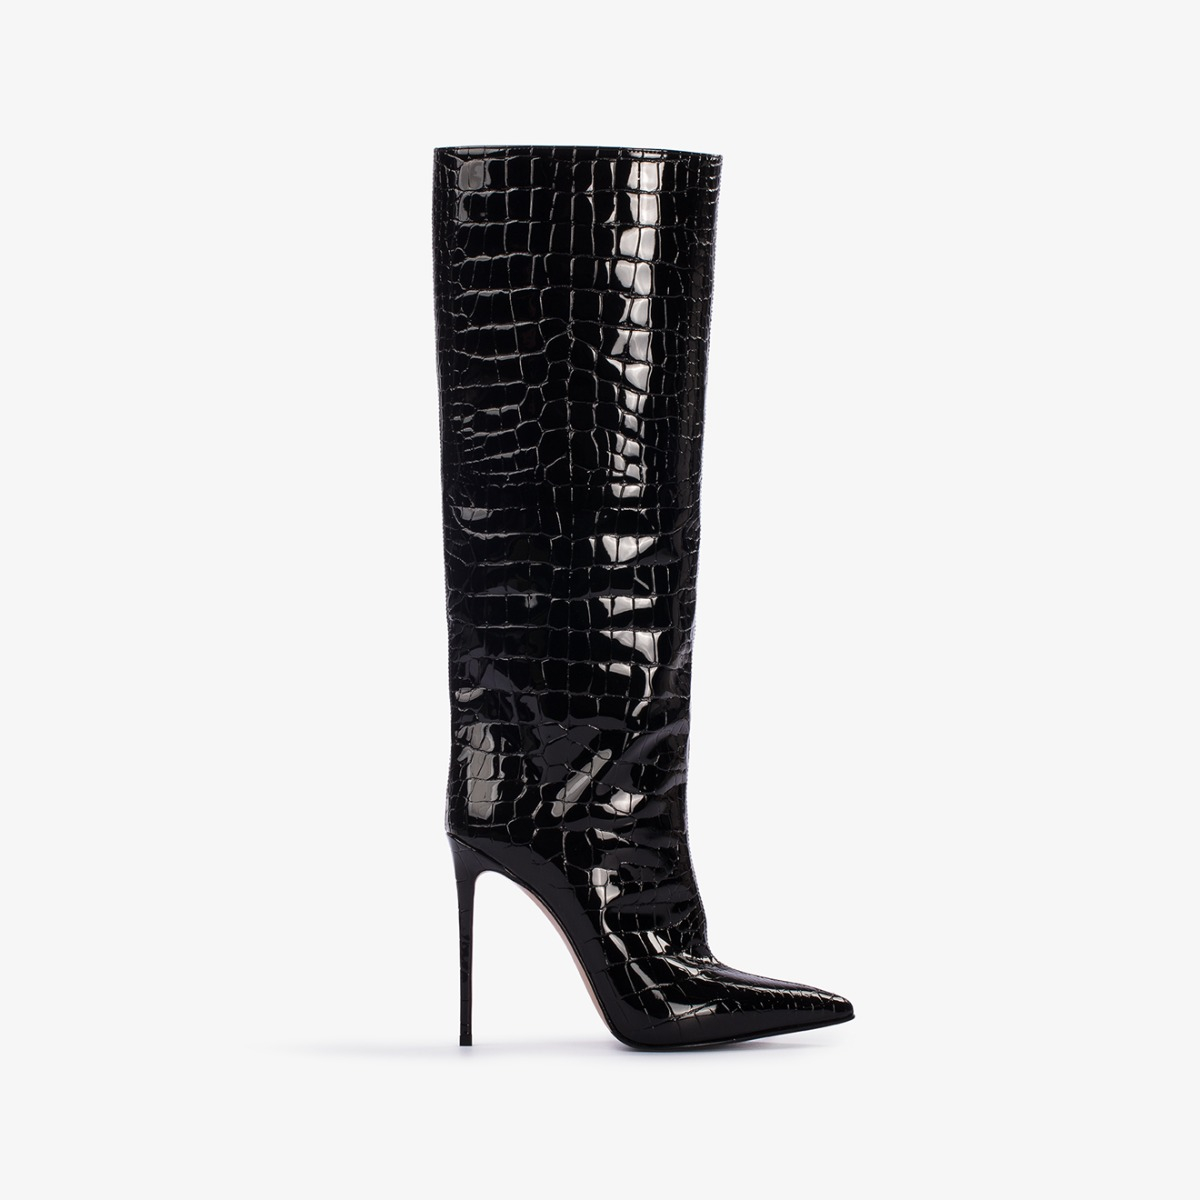 EVA BOOT 120 mm - Le Silla | Official Online Store